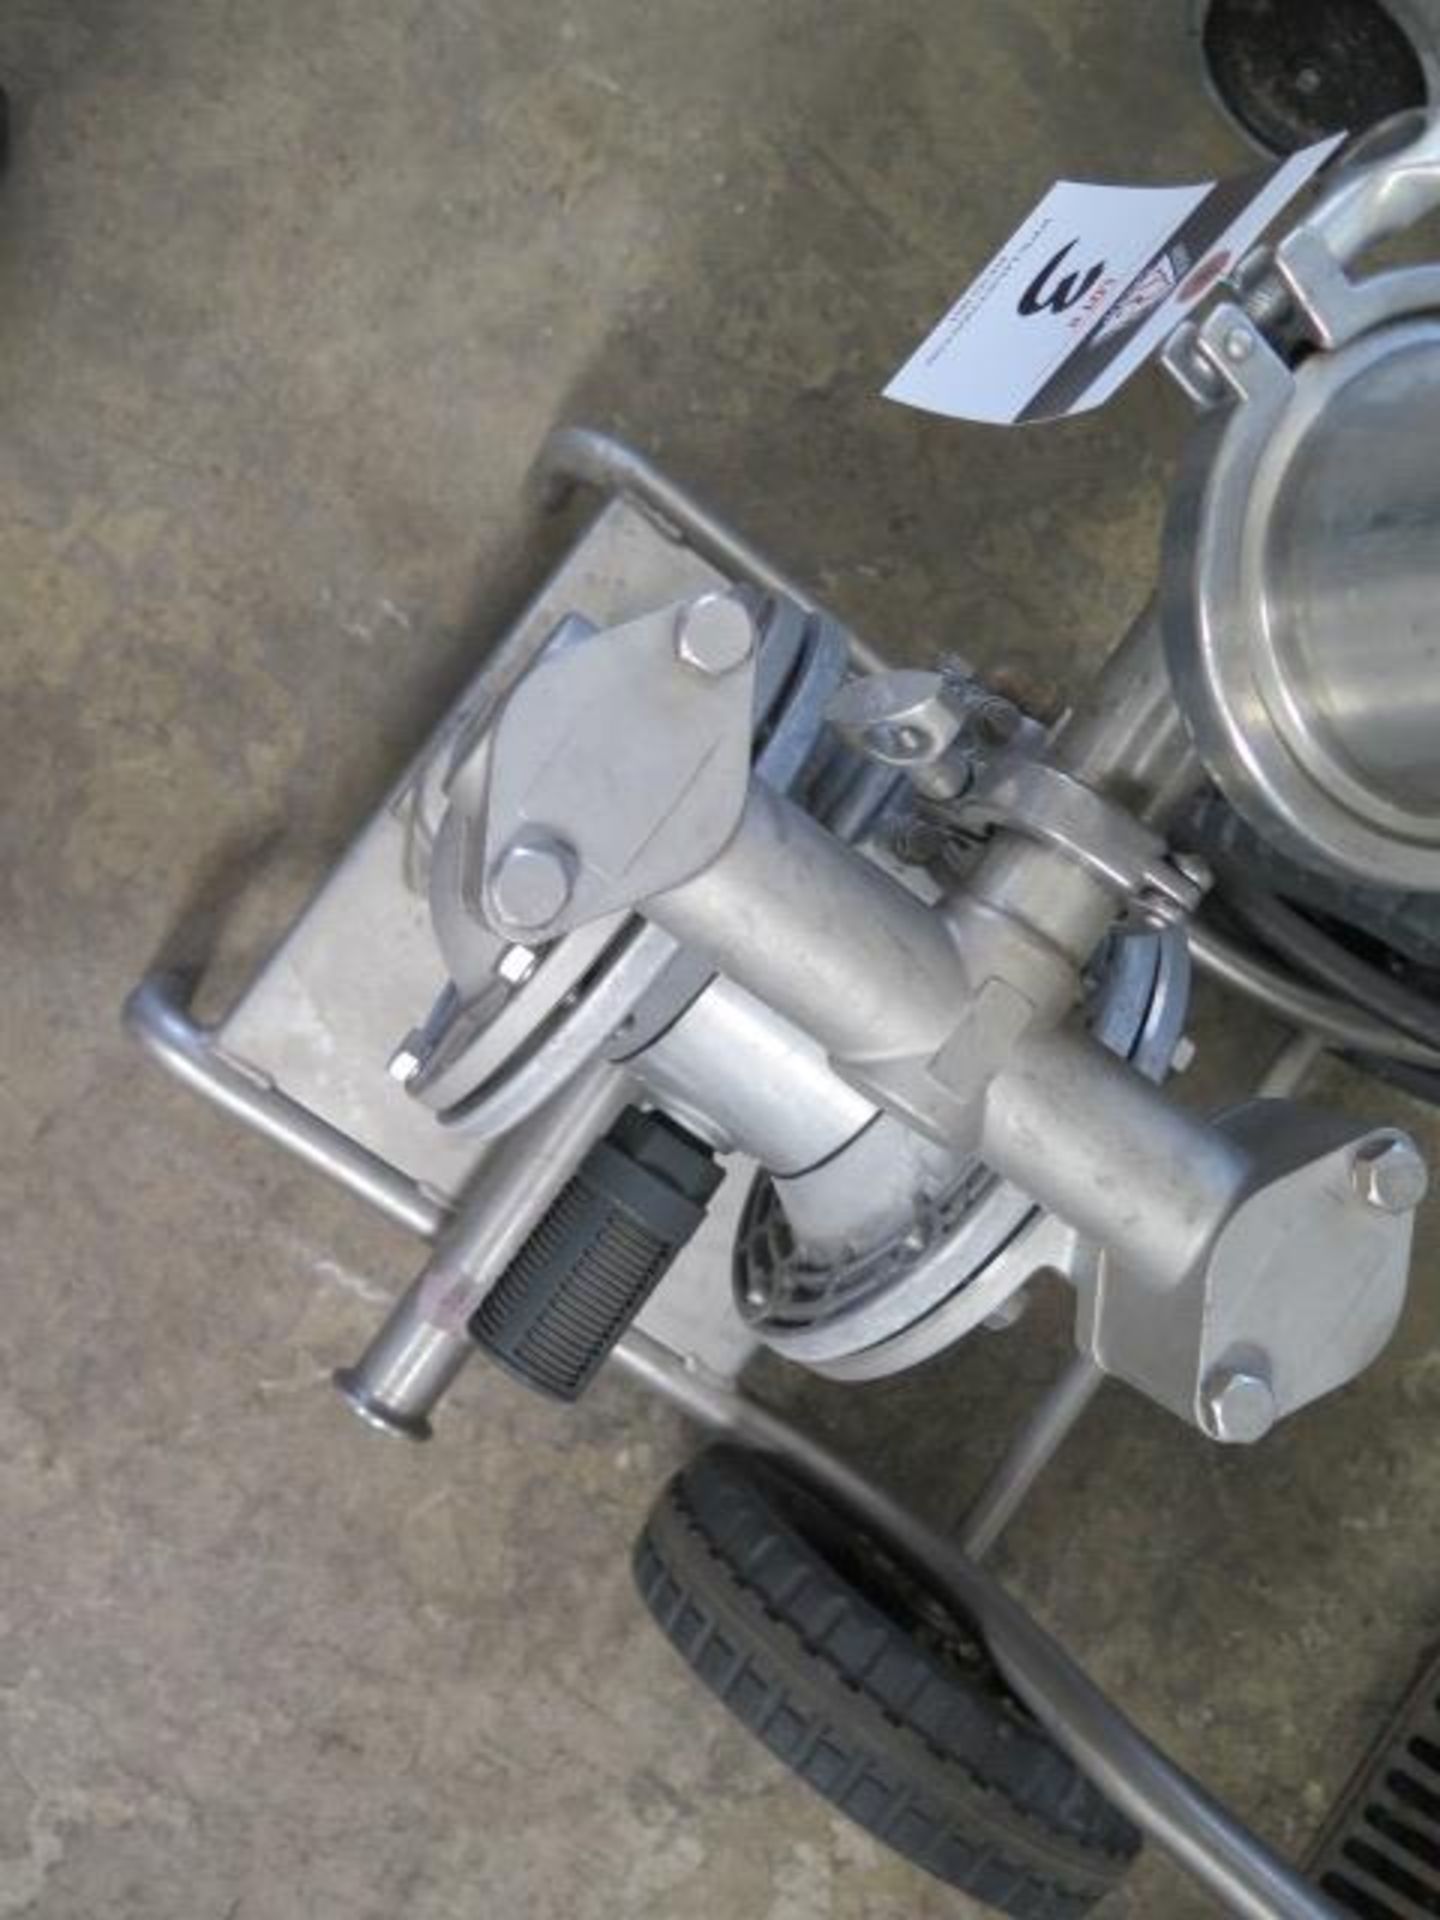 2019 Yamada NDP-25BSH-CAR Pneumatic Diaphragm Pump w/ Cart (SOLD AS-IS - NO WARRANTY) - Image 4 of 9